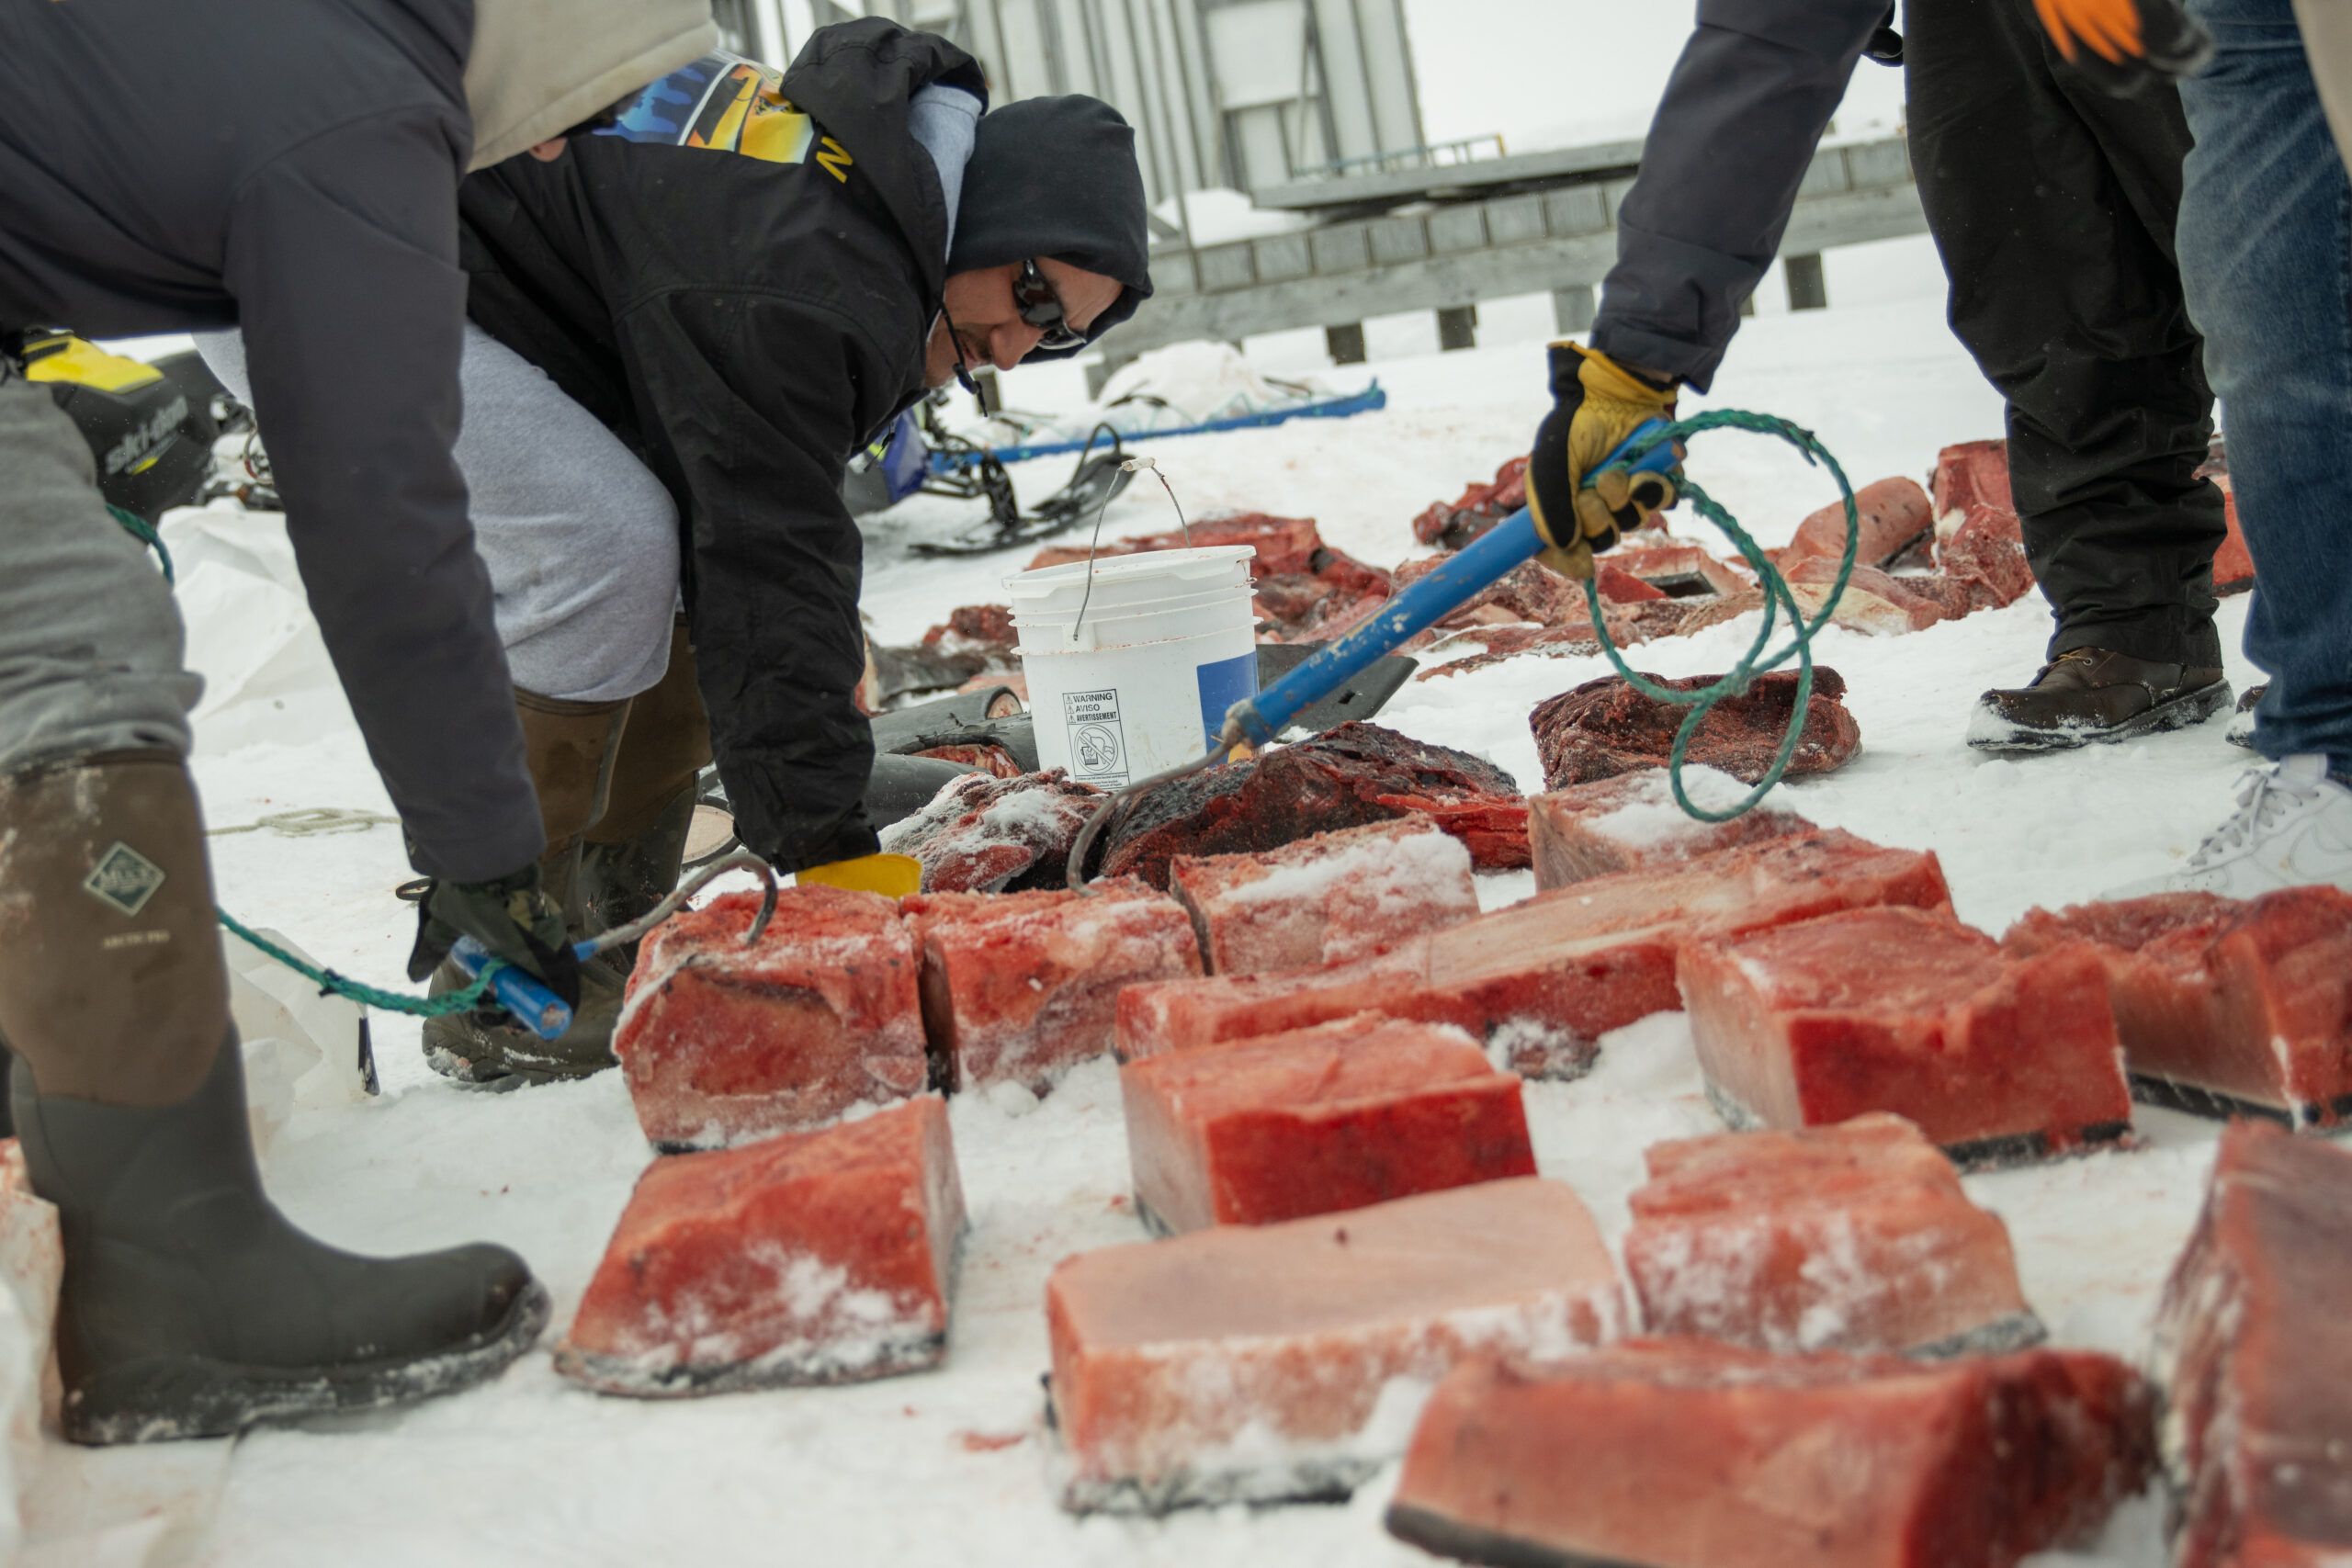 A group of men using hooks to divide up large pieces of red whale meat.